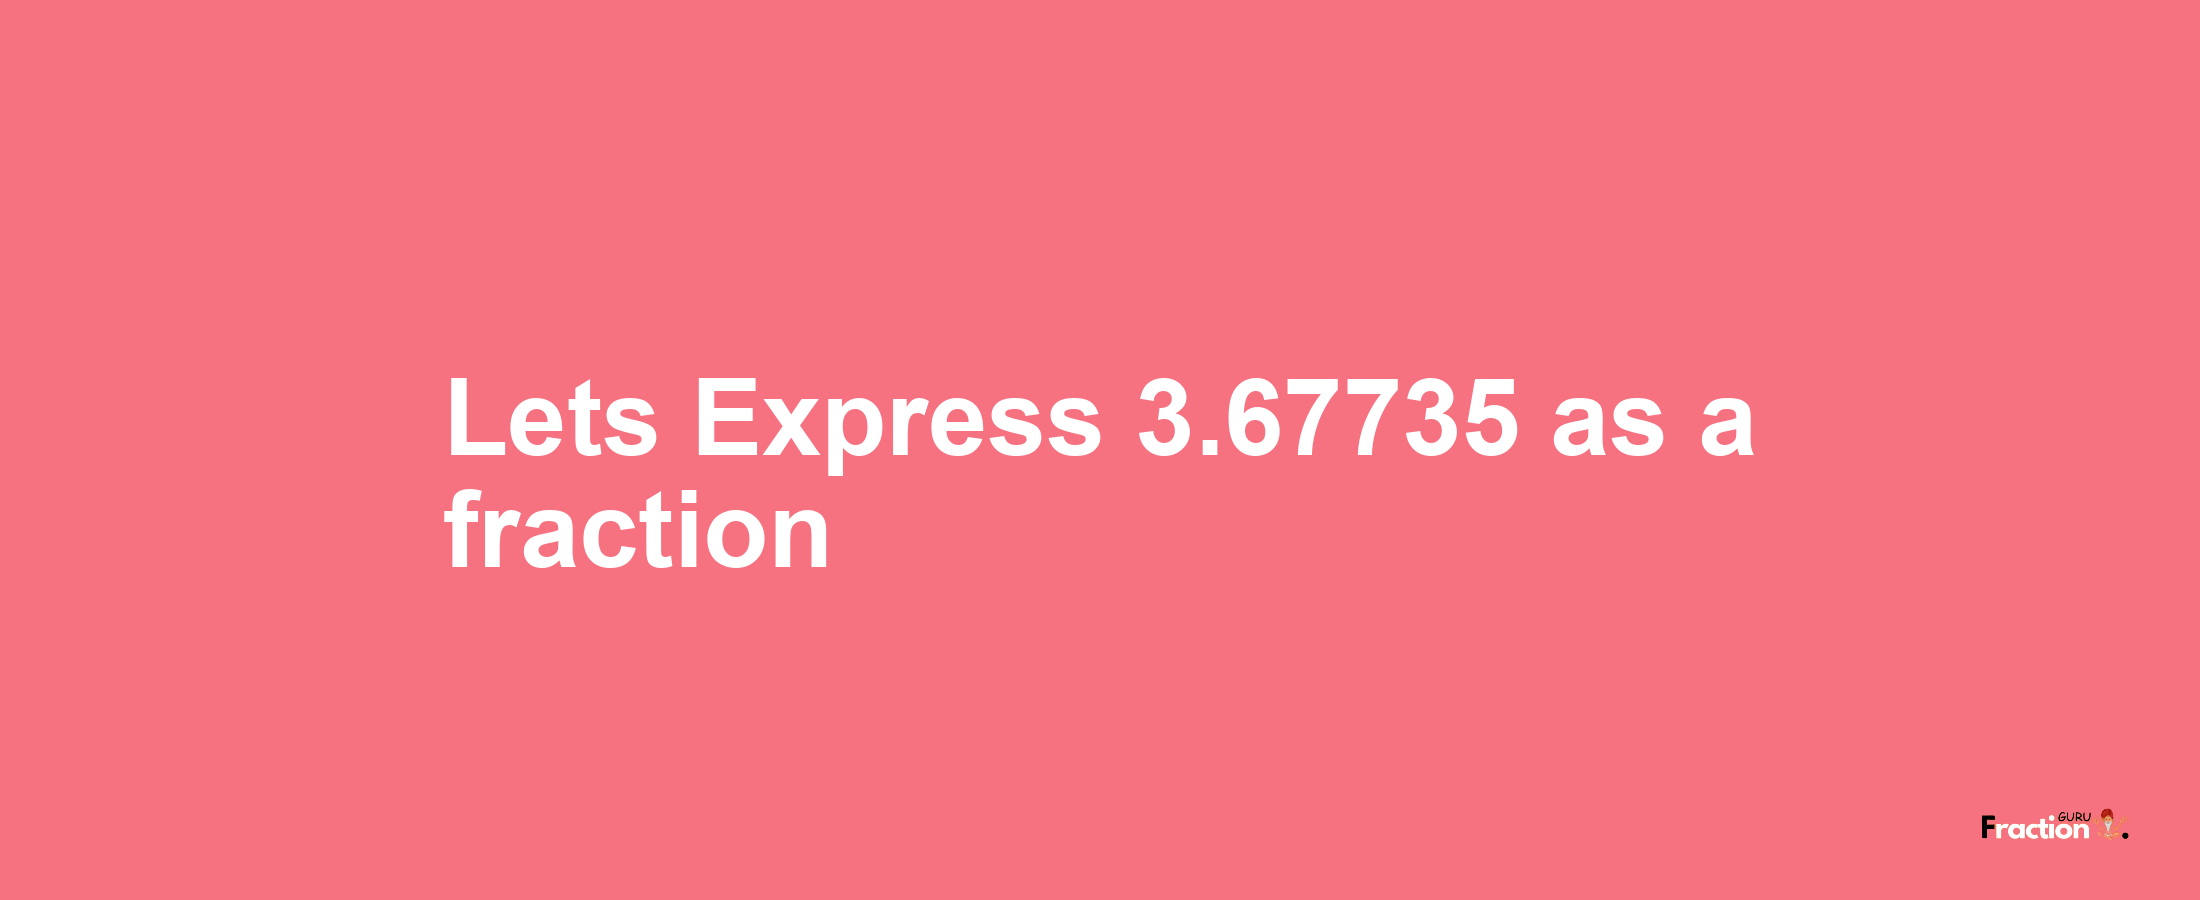 Lets Express 3.67735 as afraction